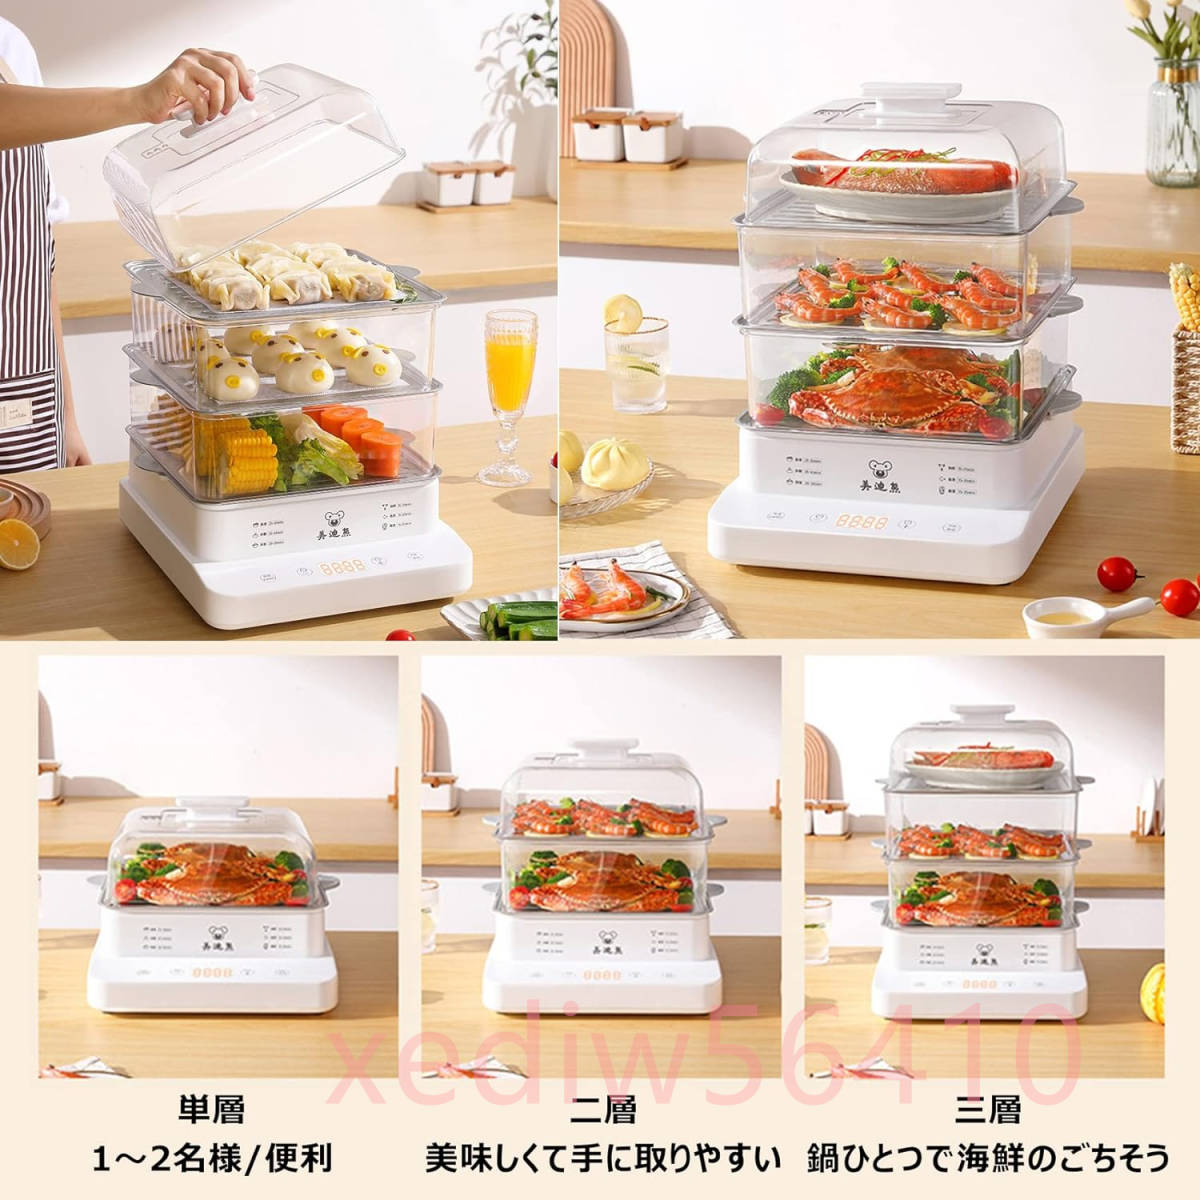  electric steamer 3 step steamer electric steam cooker 22L high capacity multifunction home use two -ply three layer steamer morning meal for machine egg steamer steamer 24H reservation timer 